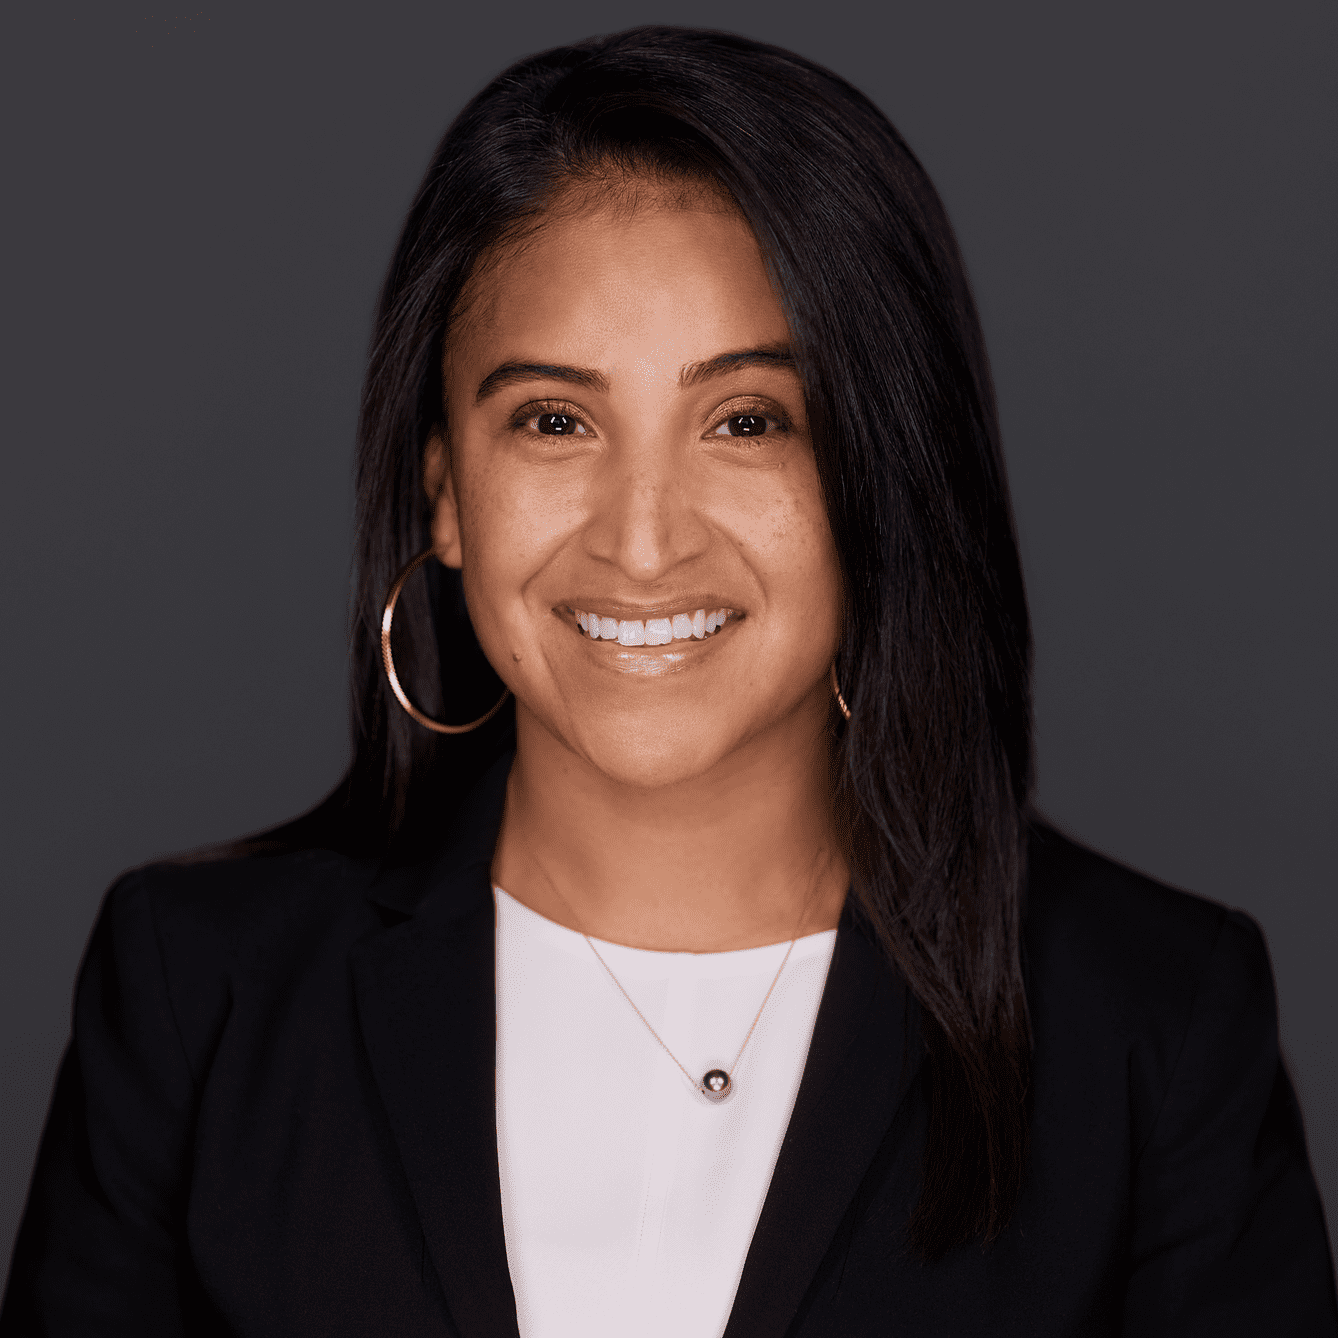 Image is a headshot of Norma Gutierrez Castro, the Assistant Director of Student Experience at Noble Schools and the founder of the Black Boys Collaborative at Noble Schools